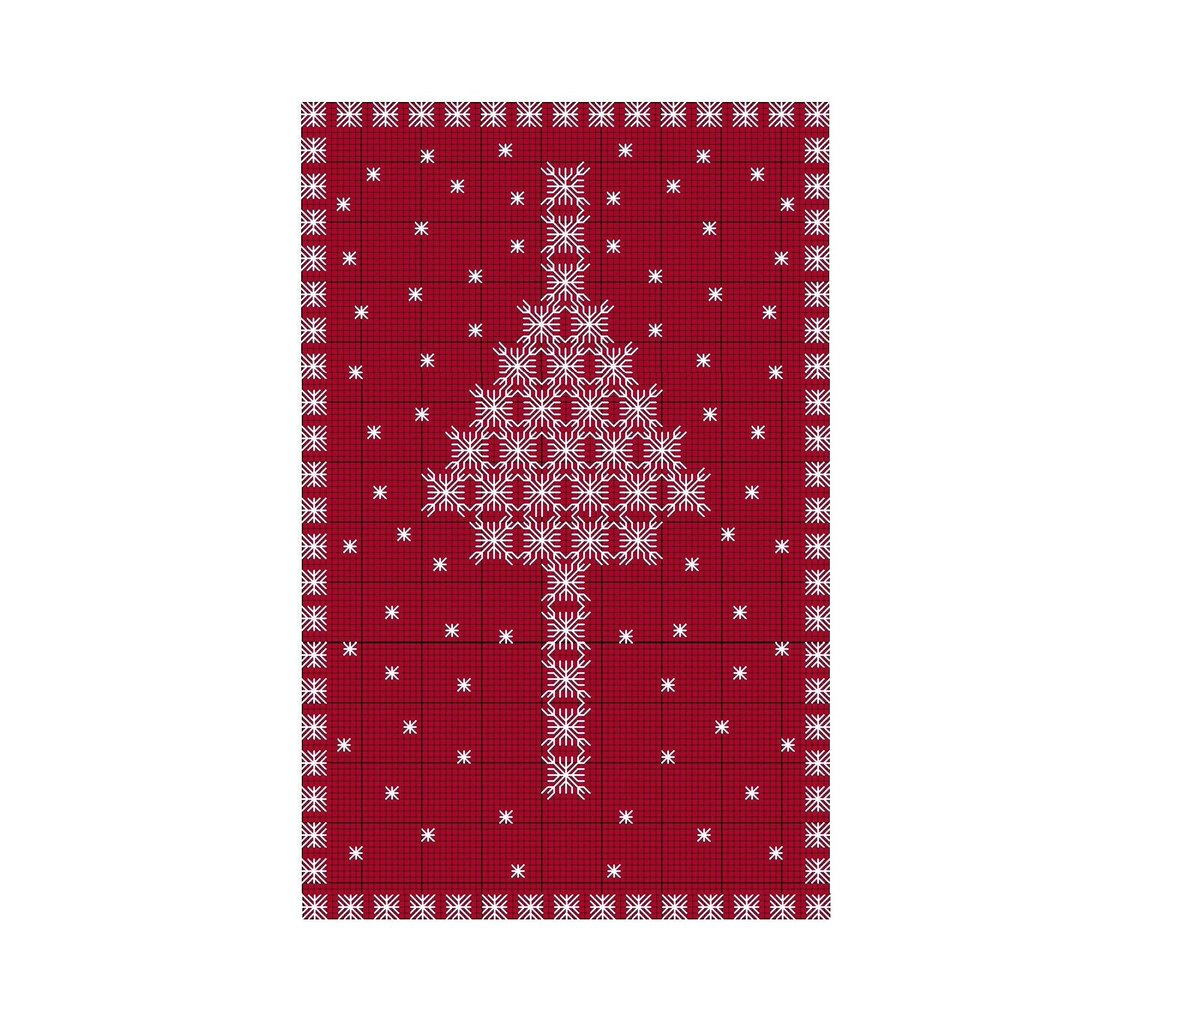 Merry Christmas Tree Cross Stitch / Backstitch Pattern Snowflakes Instant Pdf File Chart 7 Counted Greeting Card Digital Download Diy Gift tuppu.net/9d245afc #Crossstitchfurnish #Etsy #PdfCrossStitch